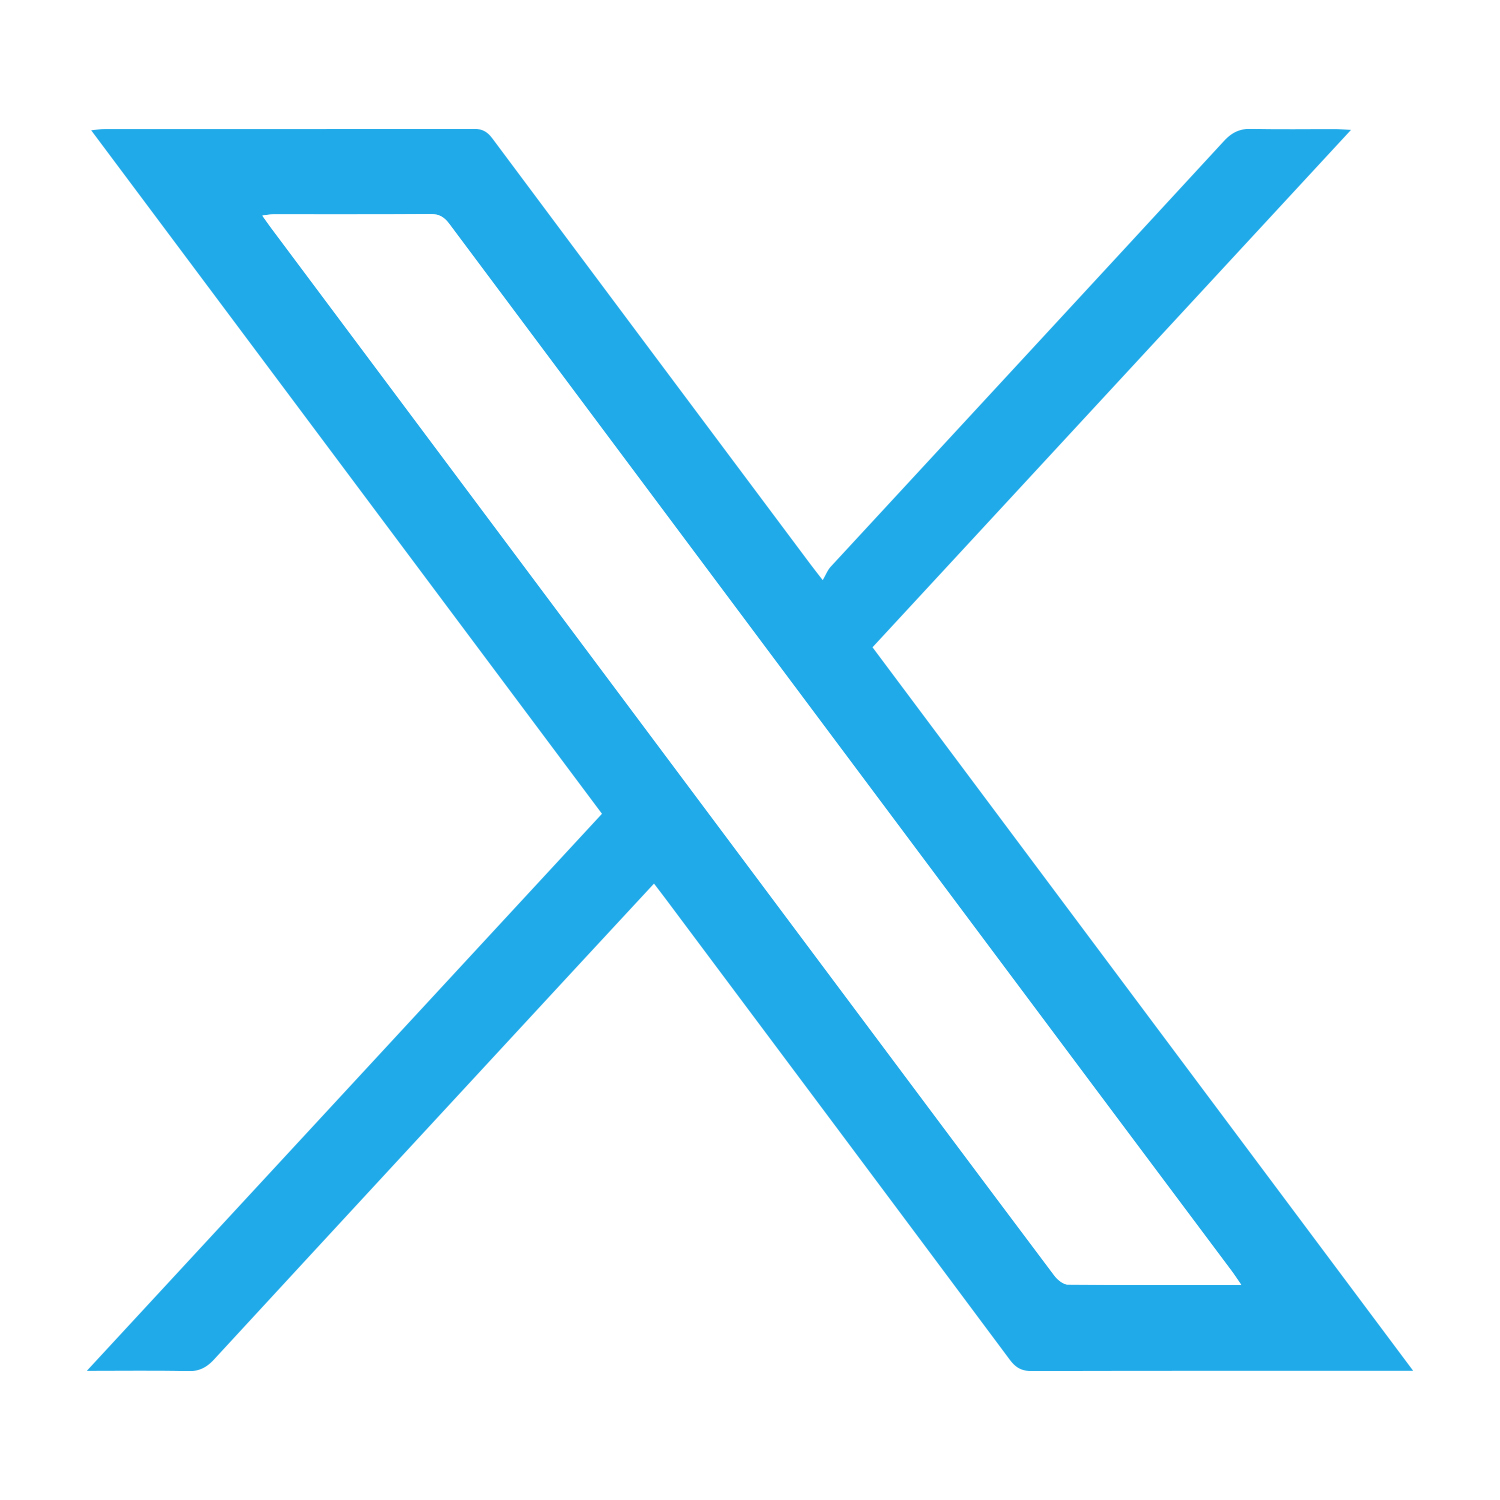 Large Twitter X logo High Res